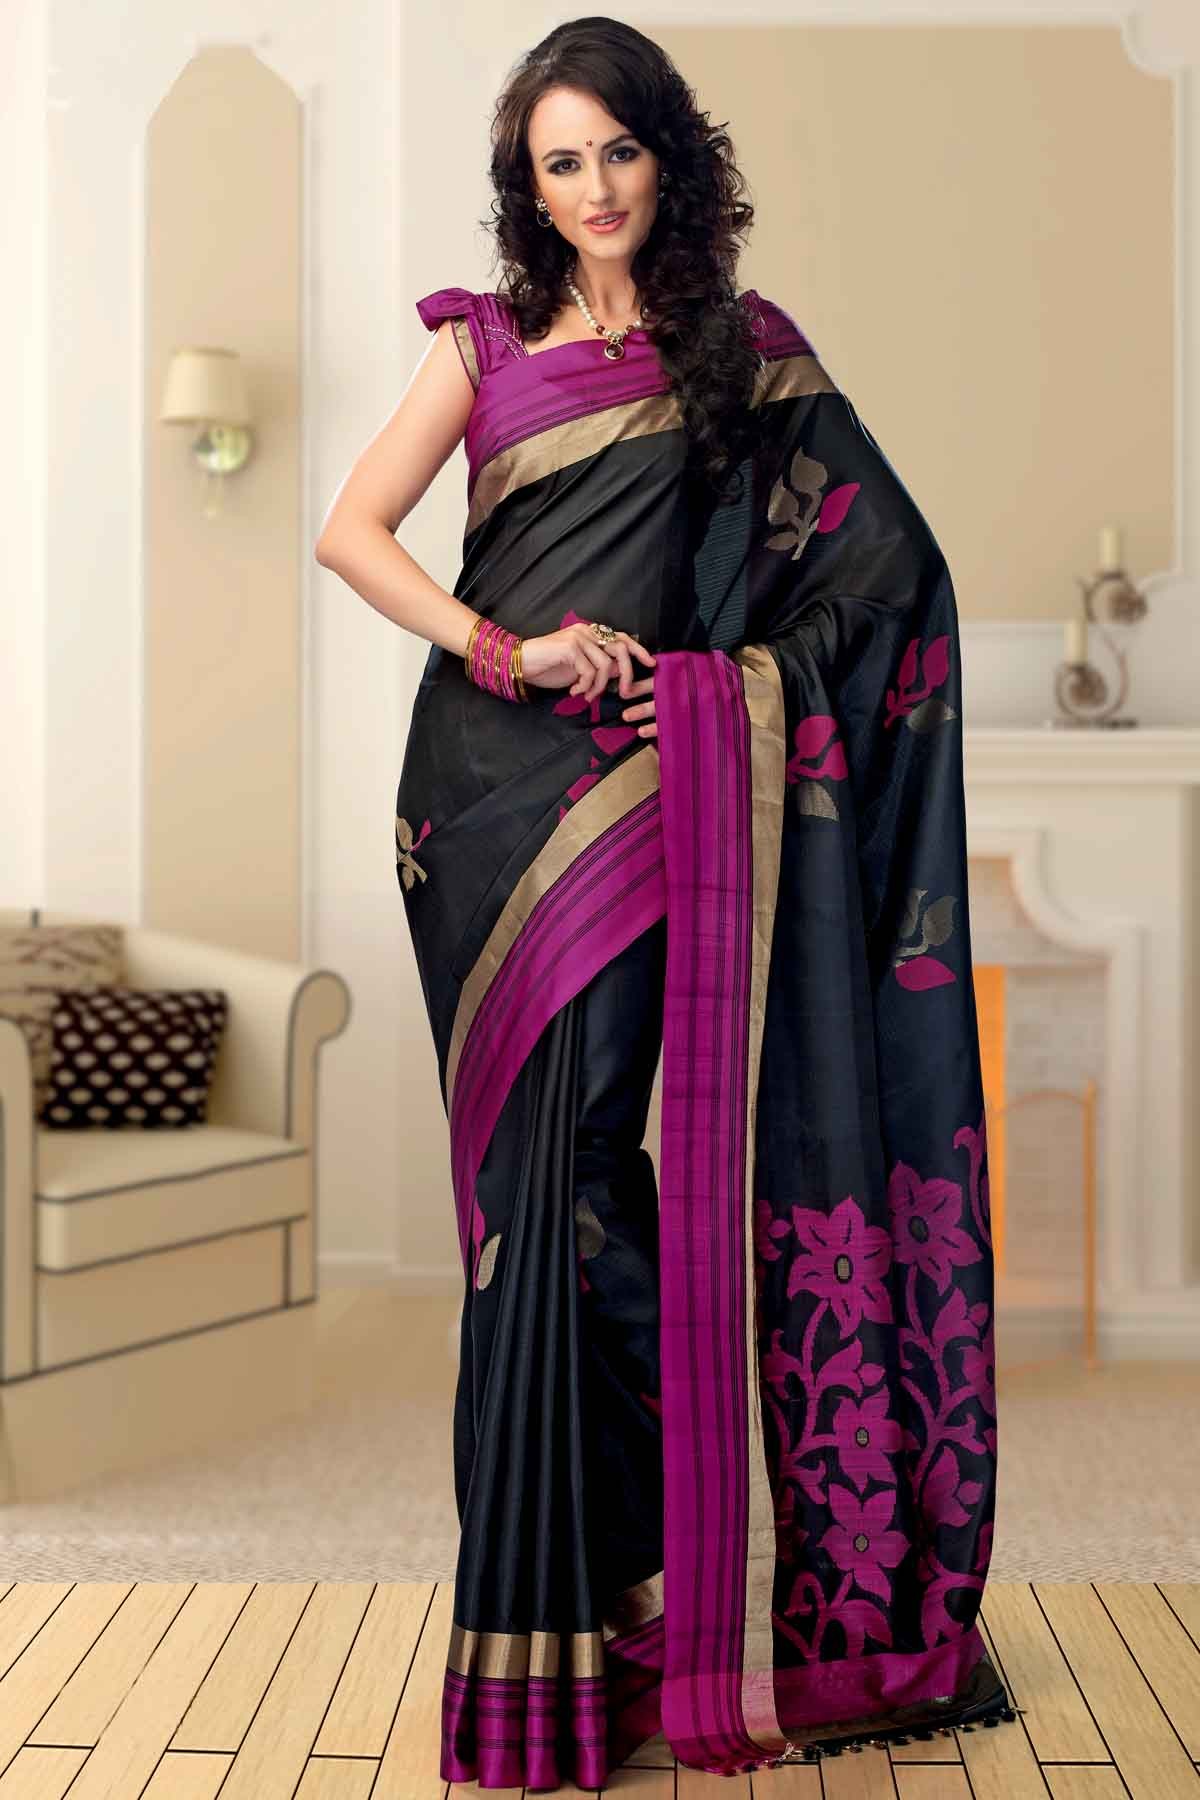 Tips On Selecting a Saree Which Suits Your Body Shape | Which Type of Saree Suits Your Body Shape